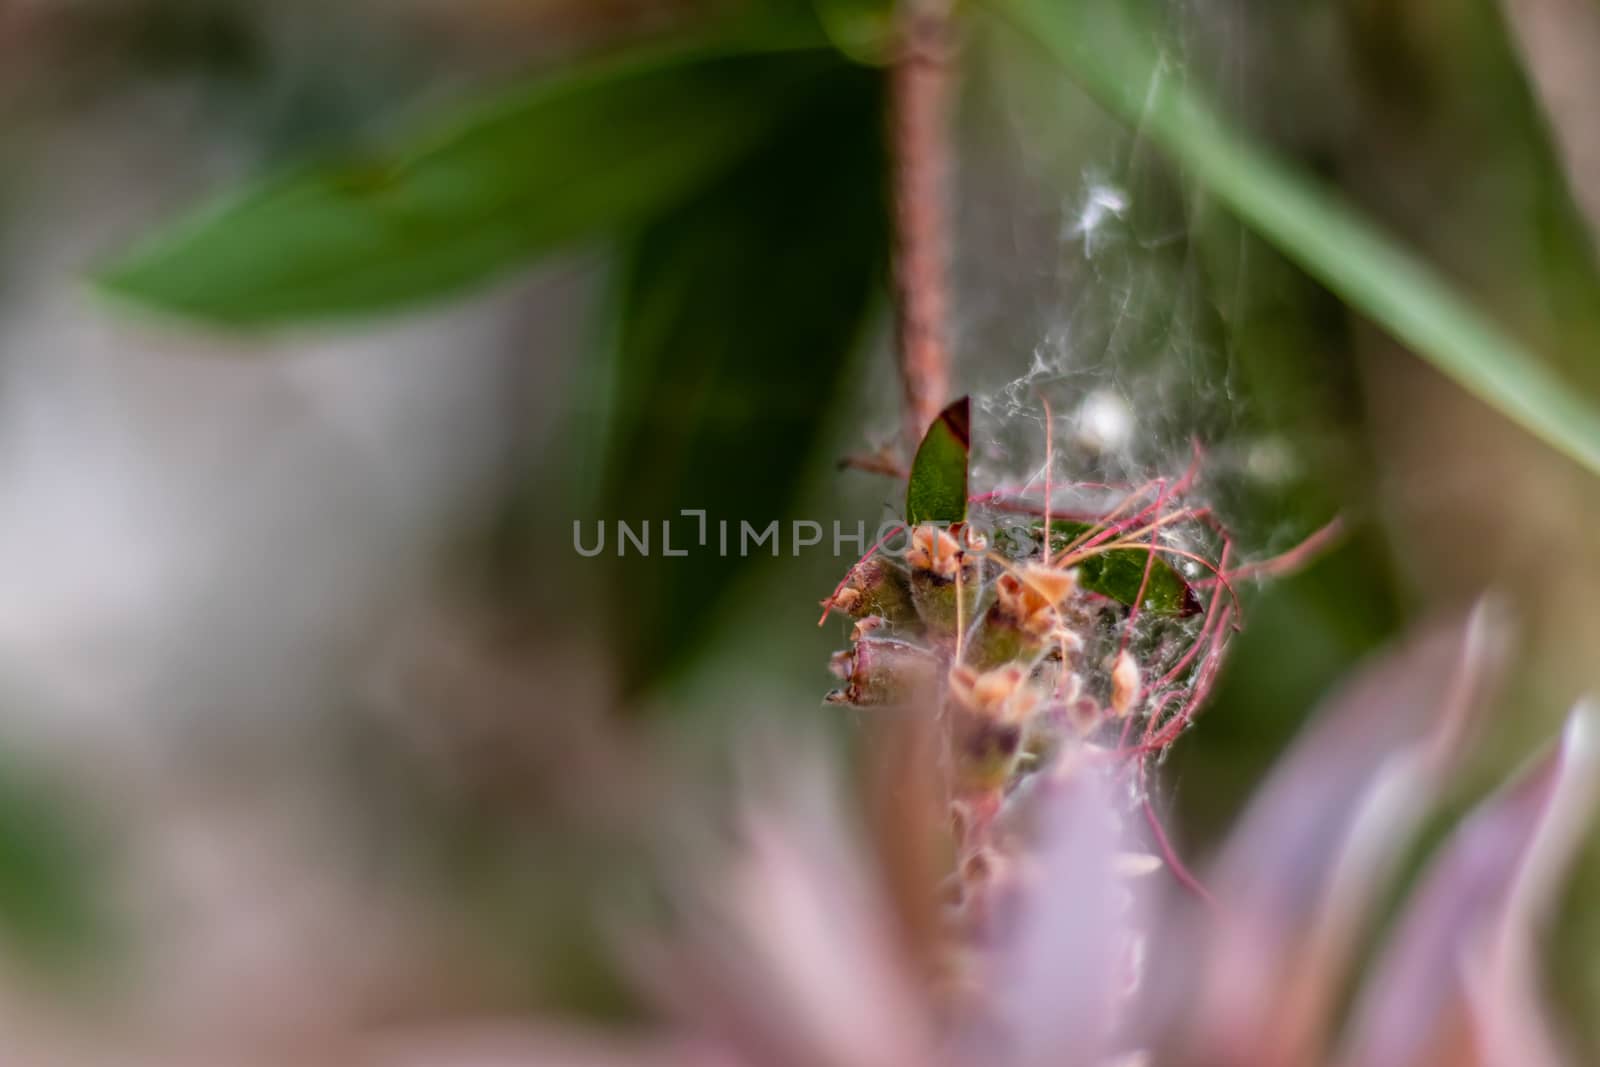 a closeup shoot to green plant with interesting shape - spider webs on it with blurry side objects. photo has taken at izmir/turkey.